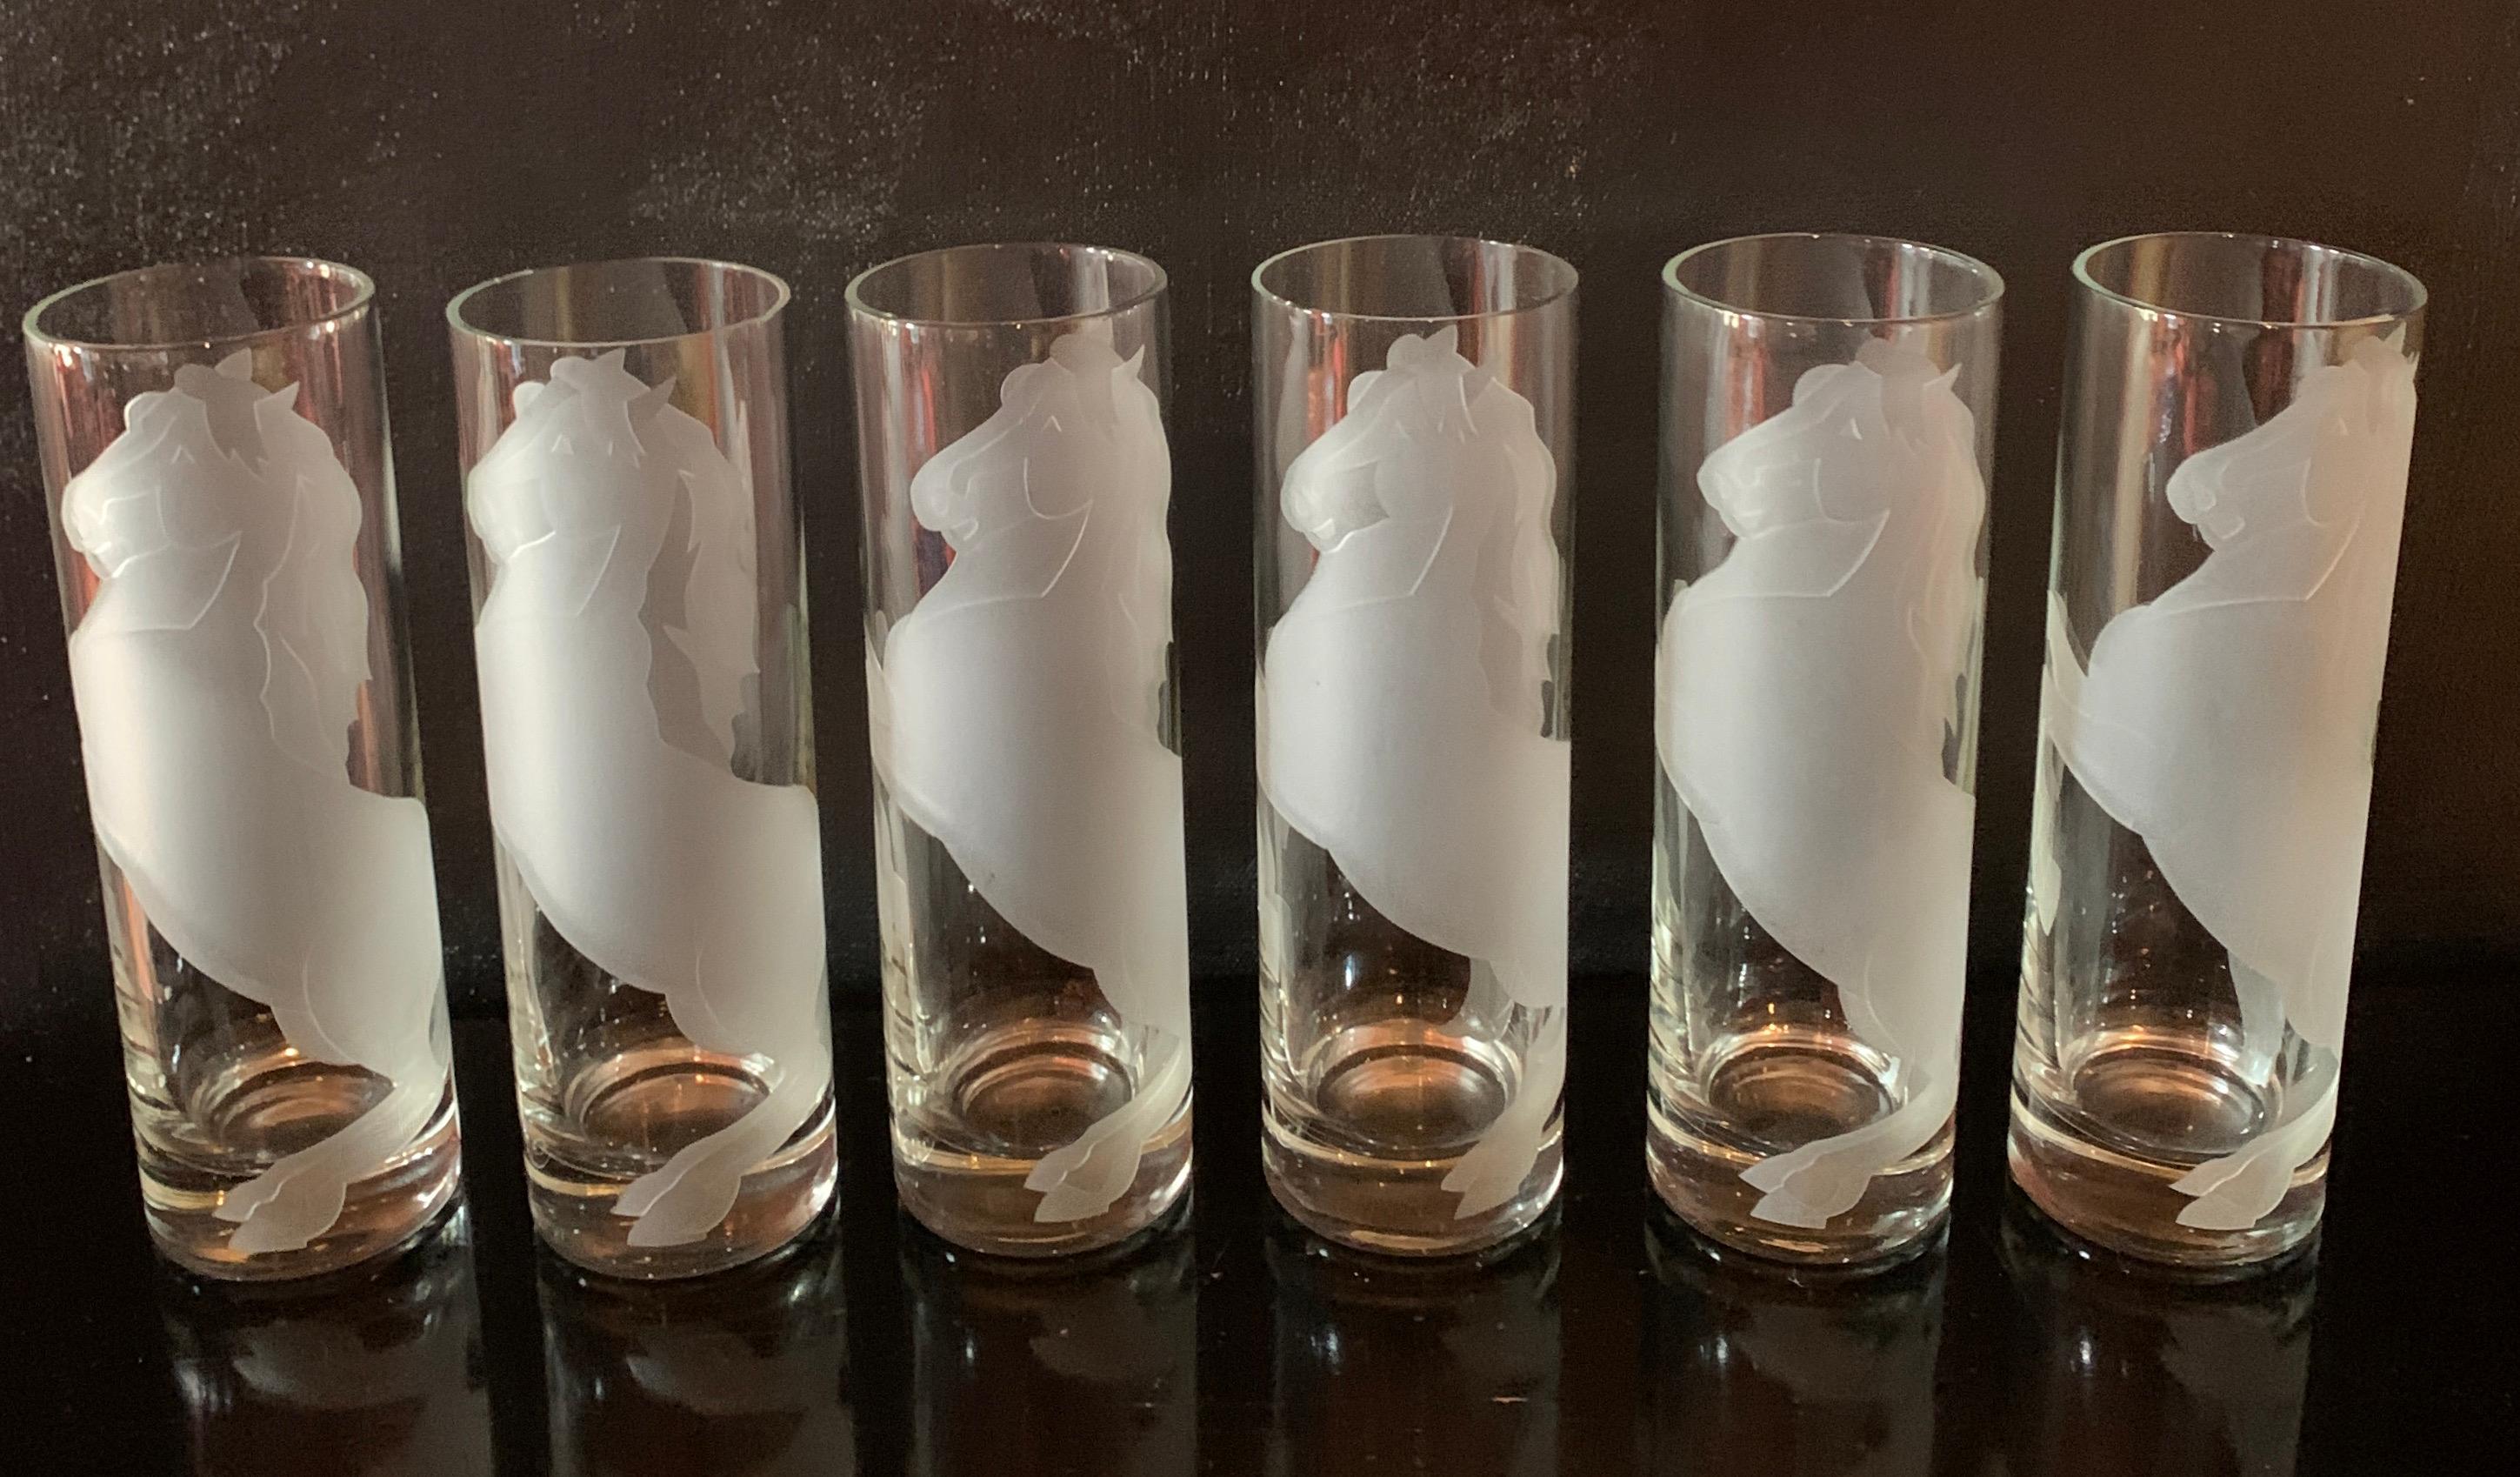 Set of six deco style horse etched cocktail glasses - a stunning set and a compliment to any bar or dining table. The stylish horse graces the glasses and are wrapped around the perimeter of the glasses.